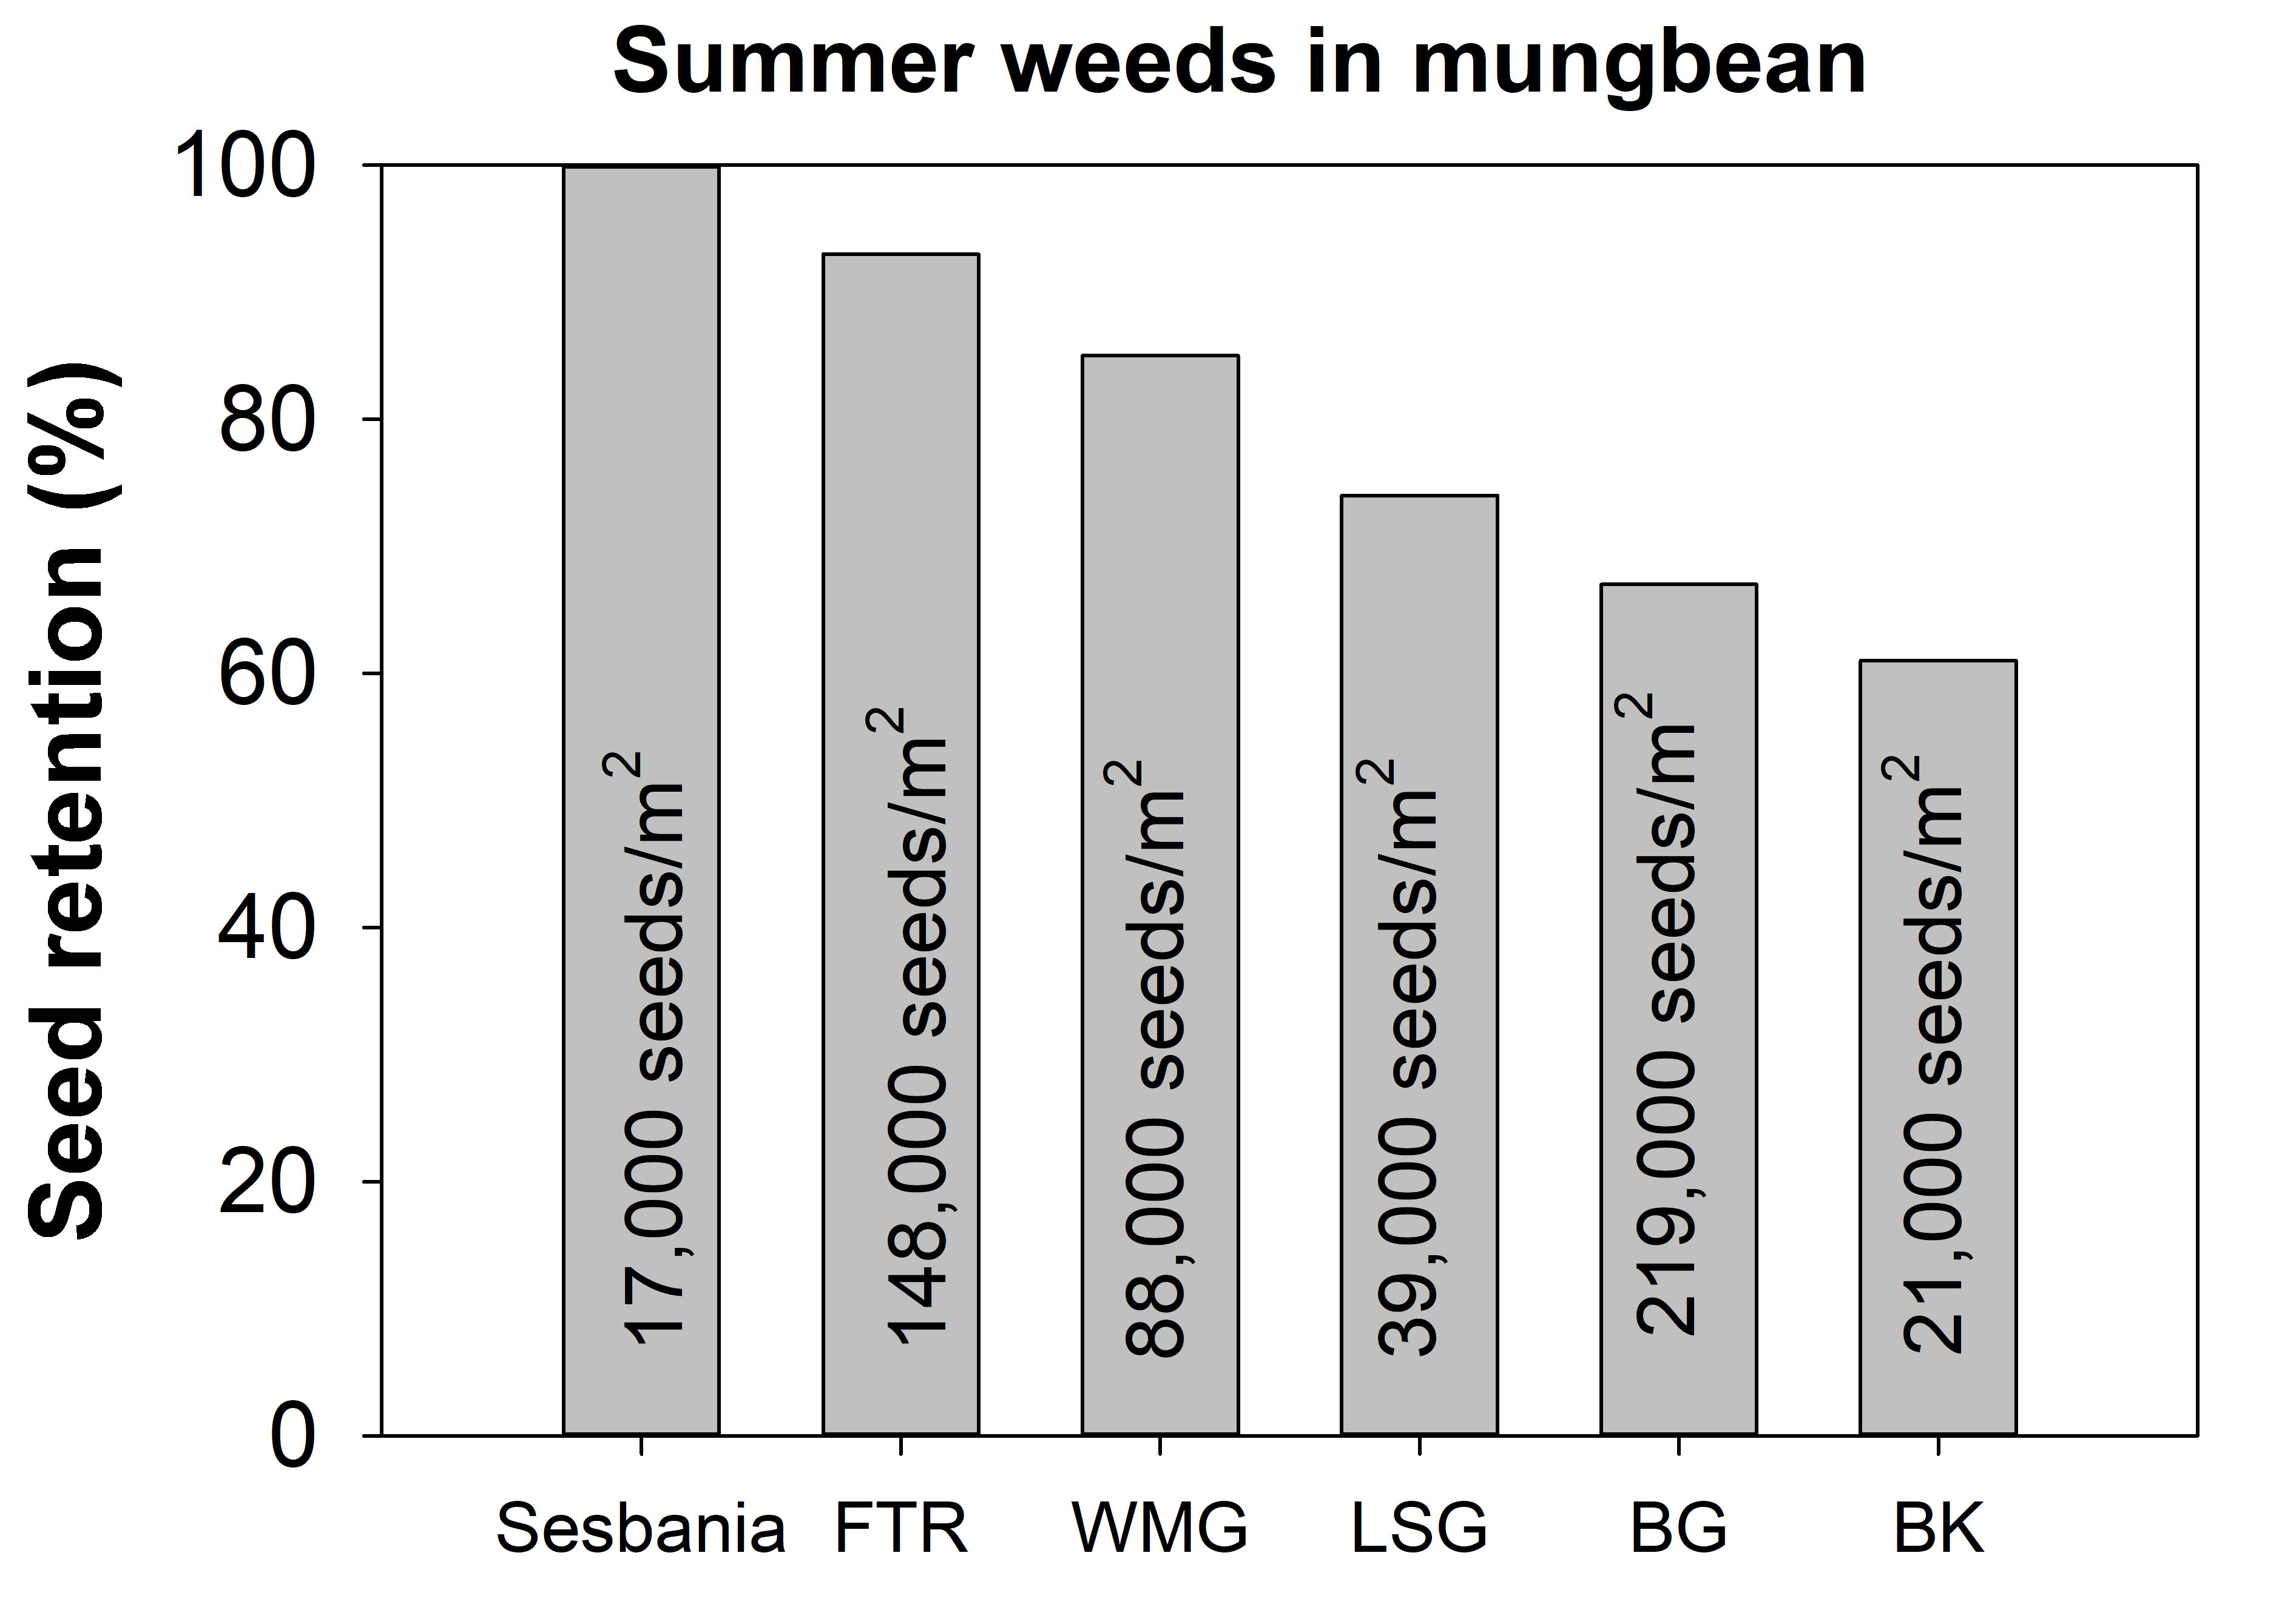 This column graph shows seed retention of summer weeds in a mungbean crop. Maximum seed production (seeds/m2) by these species is also given.